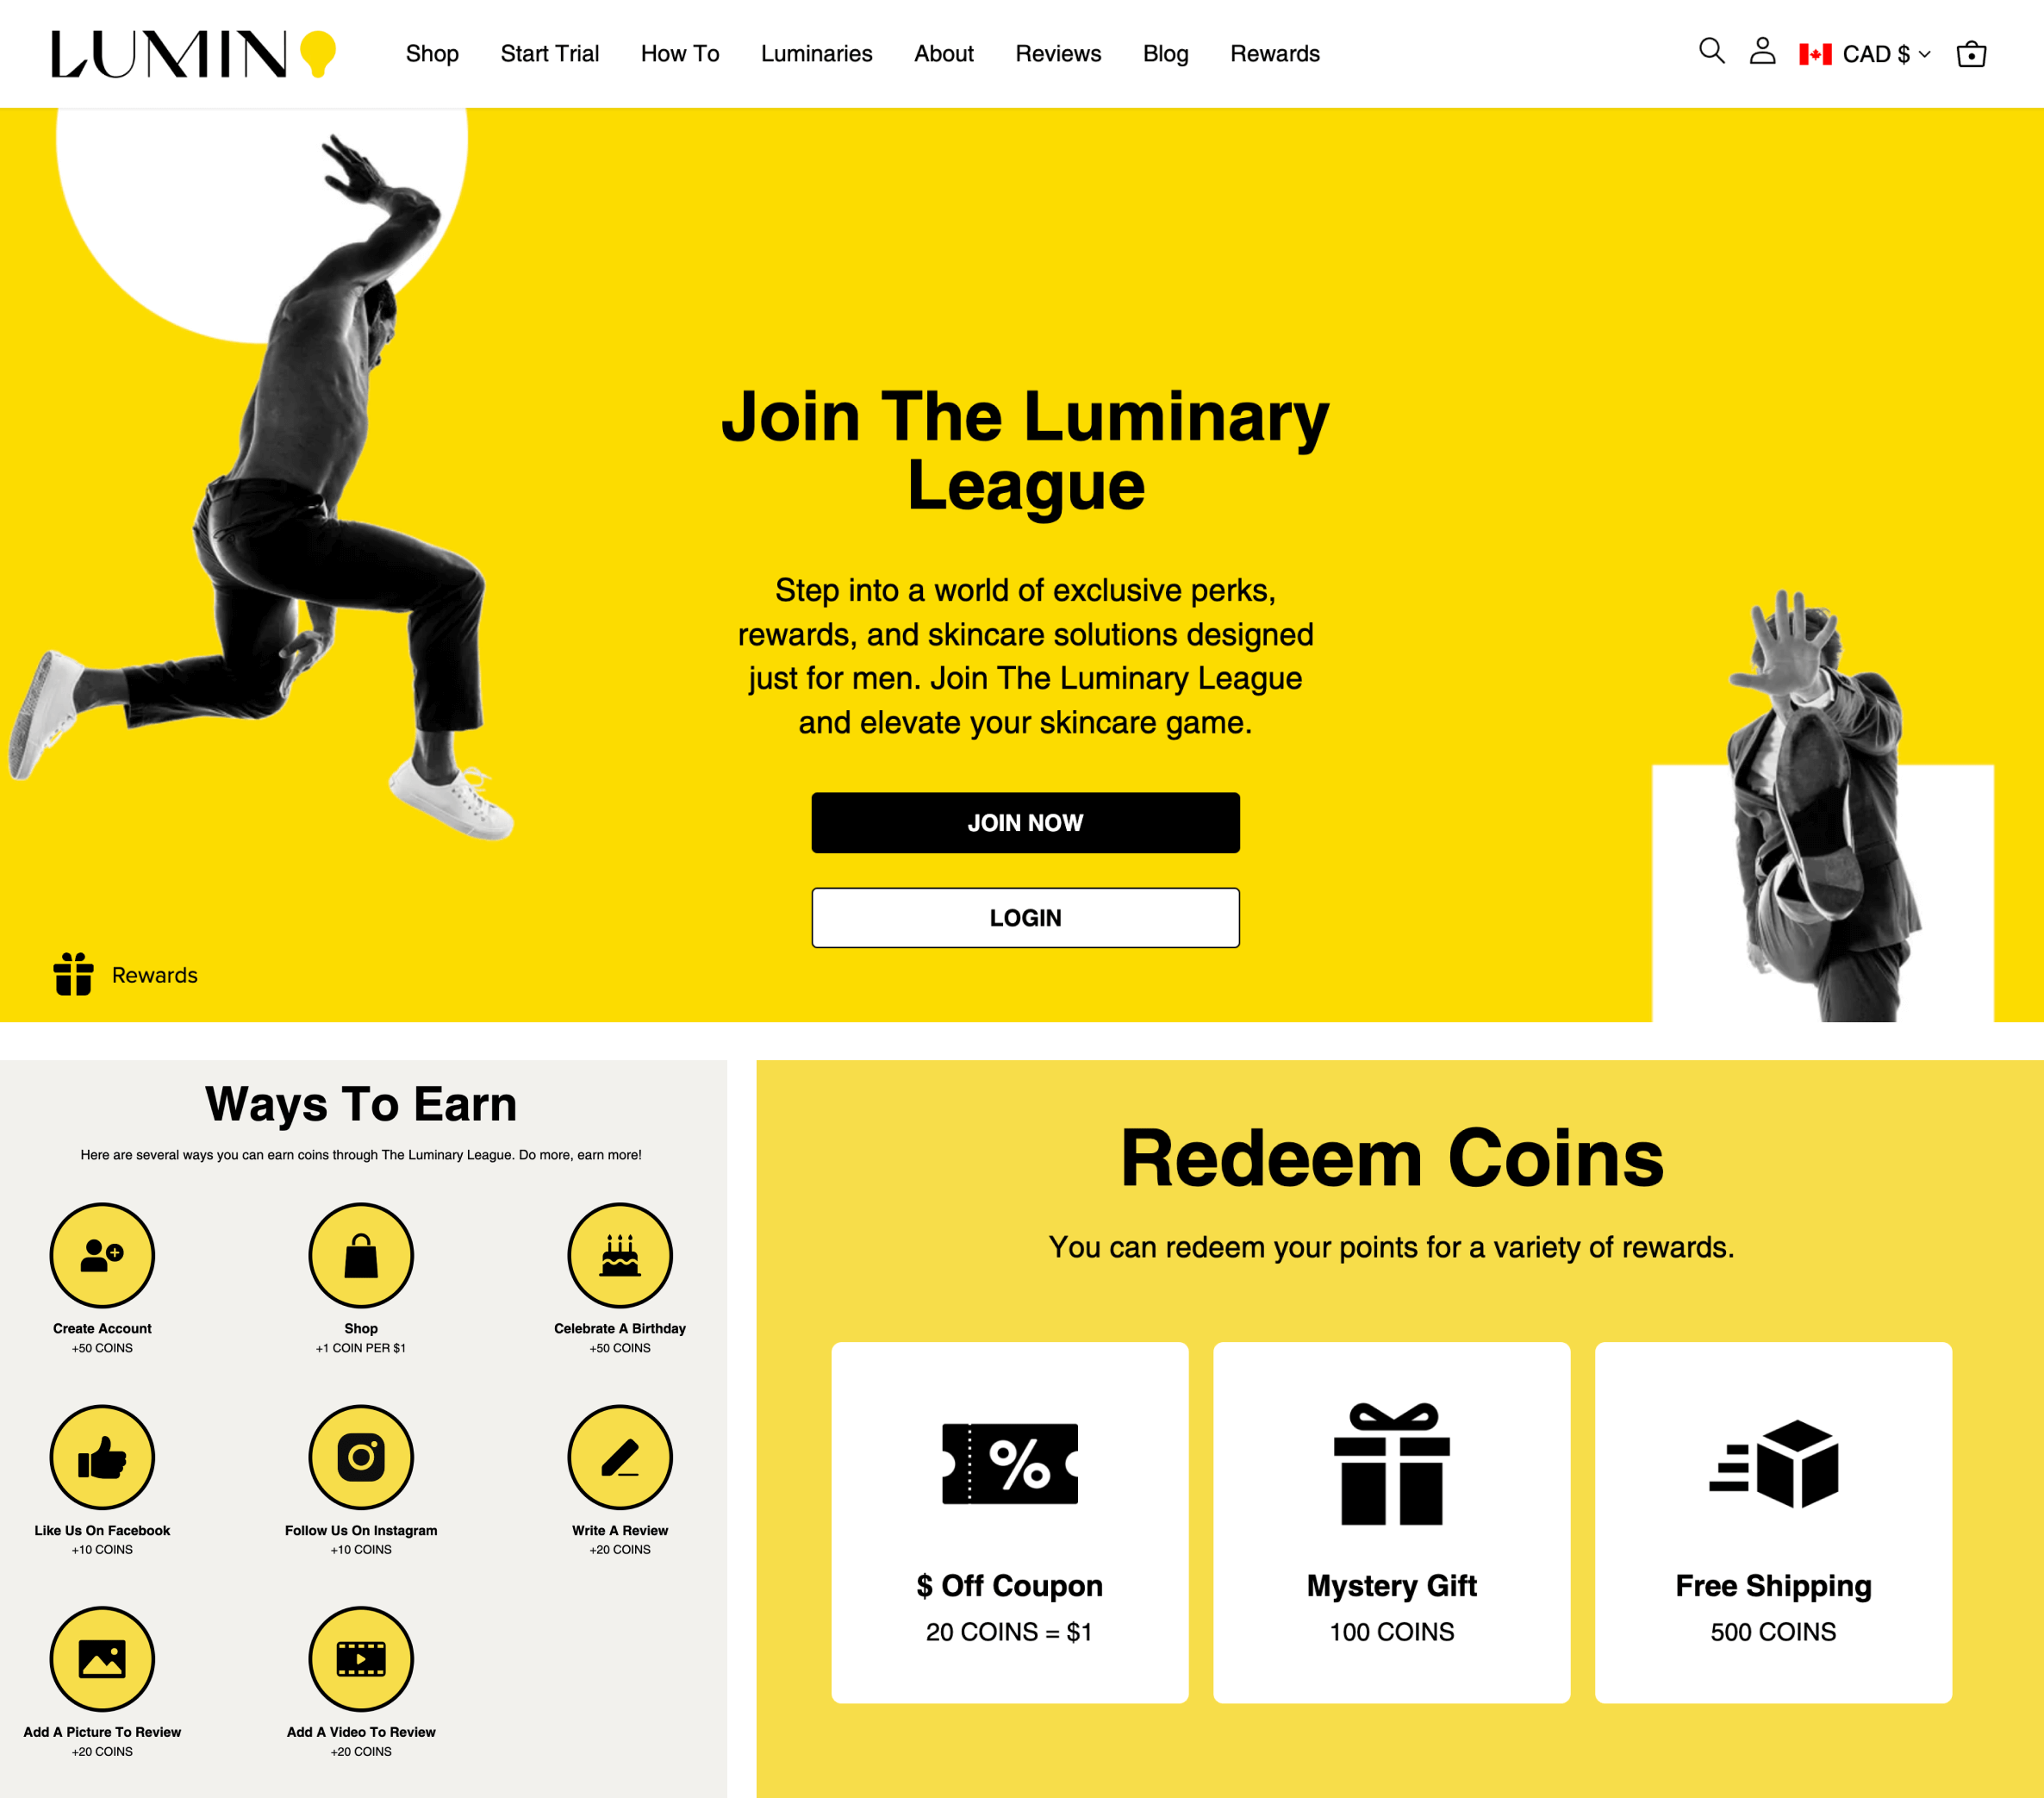 A screenshot of Lumin's rewards program explainer page showing how to earn and redeem points. 